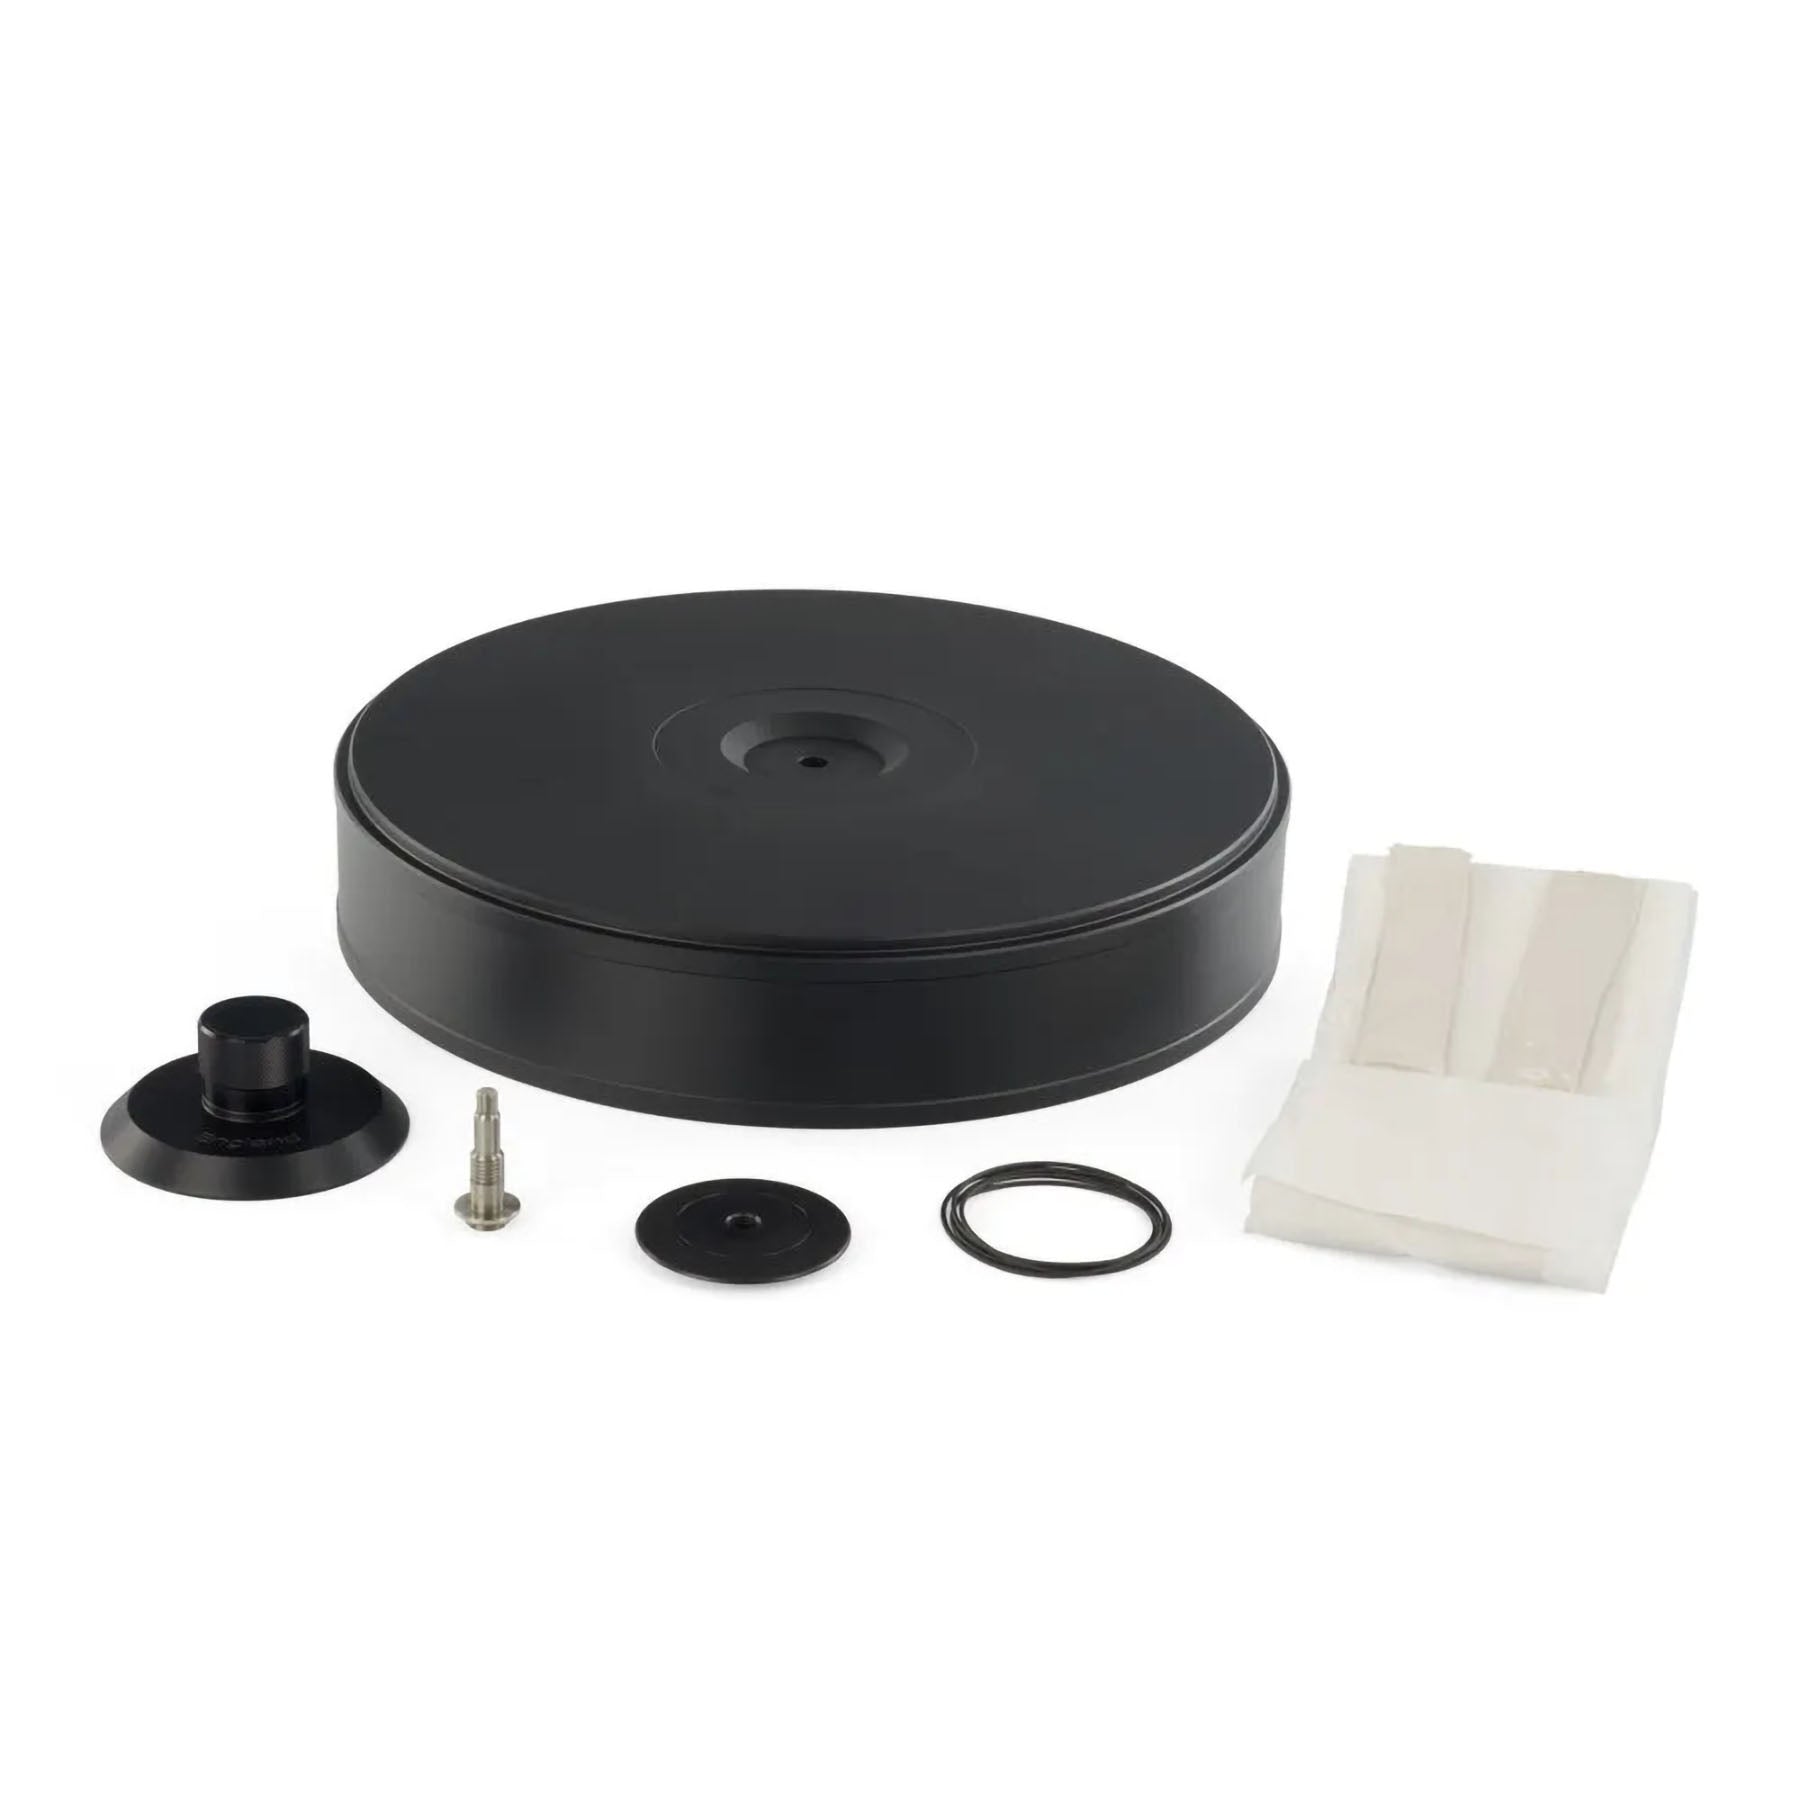 Michell Orbe Platter Kit for GyroDecs and Gyro SE